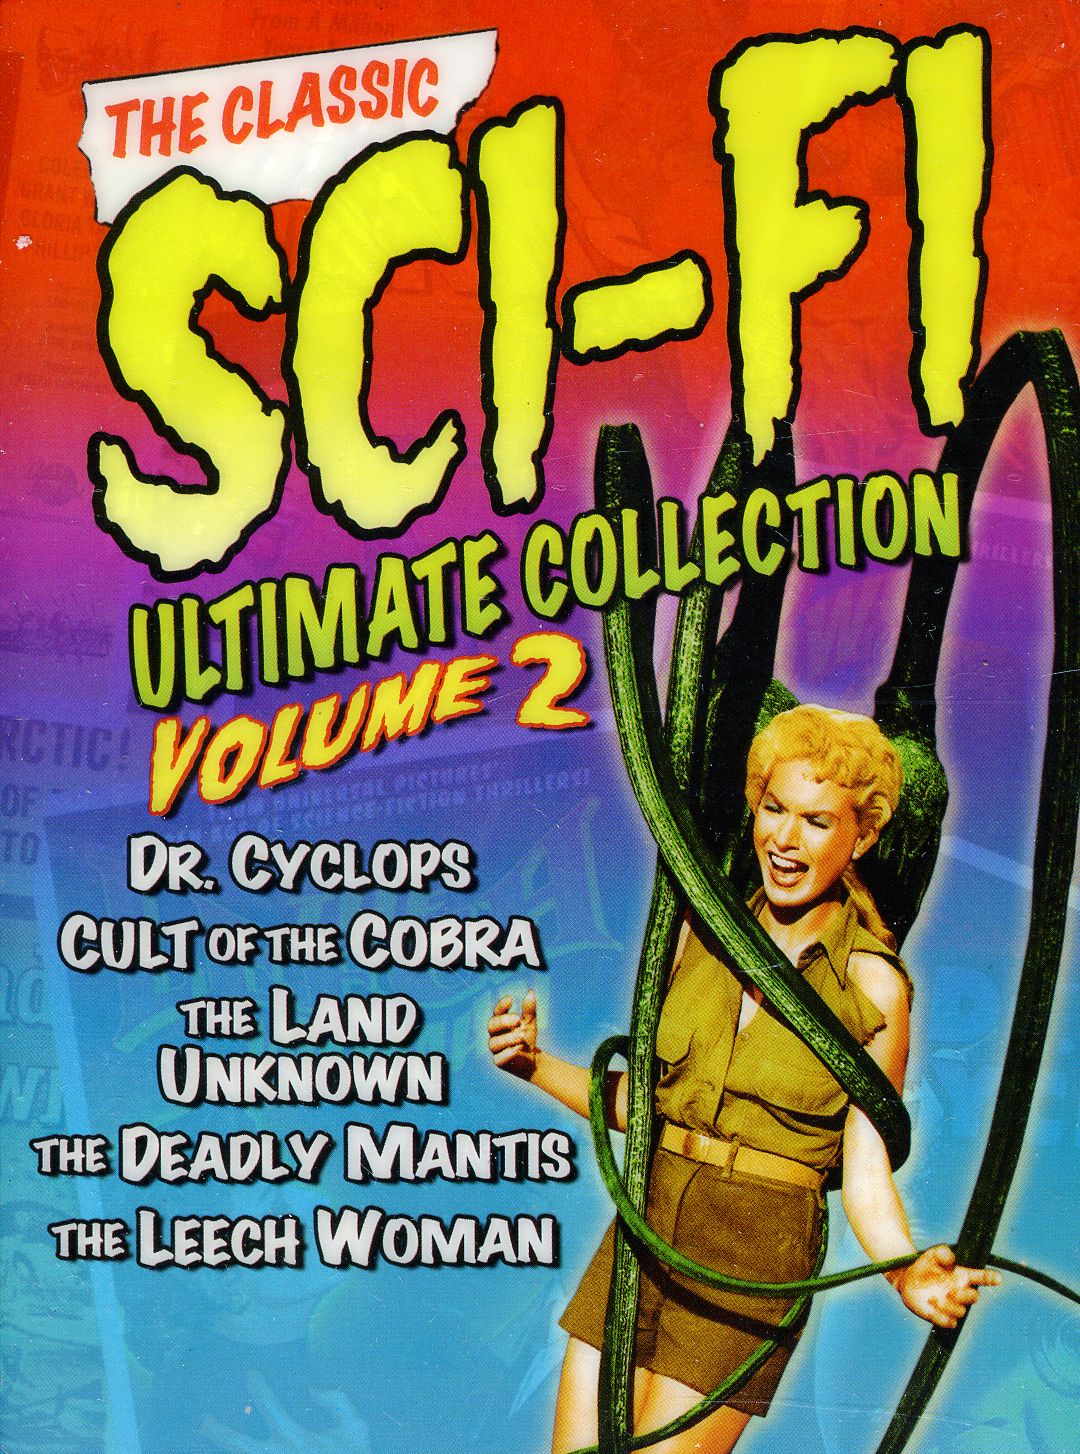 CLASSIC SCI-FI ULTIMATE COLLECTION 2 (3PC)